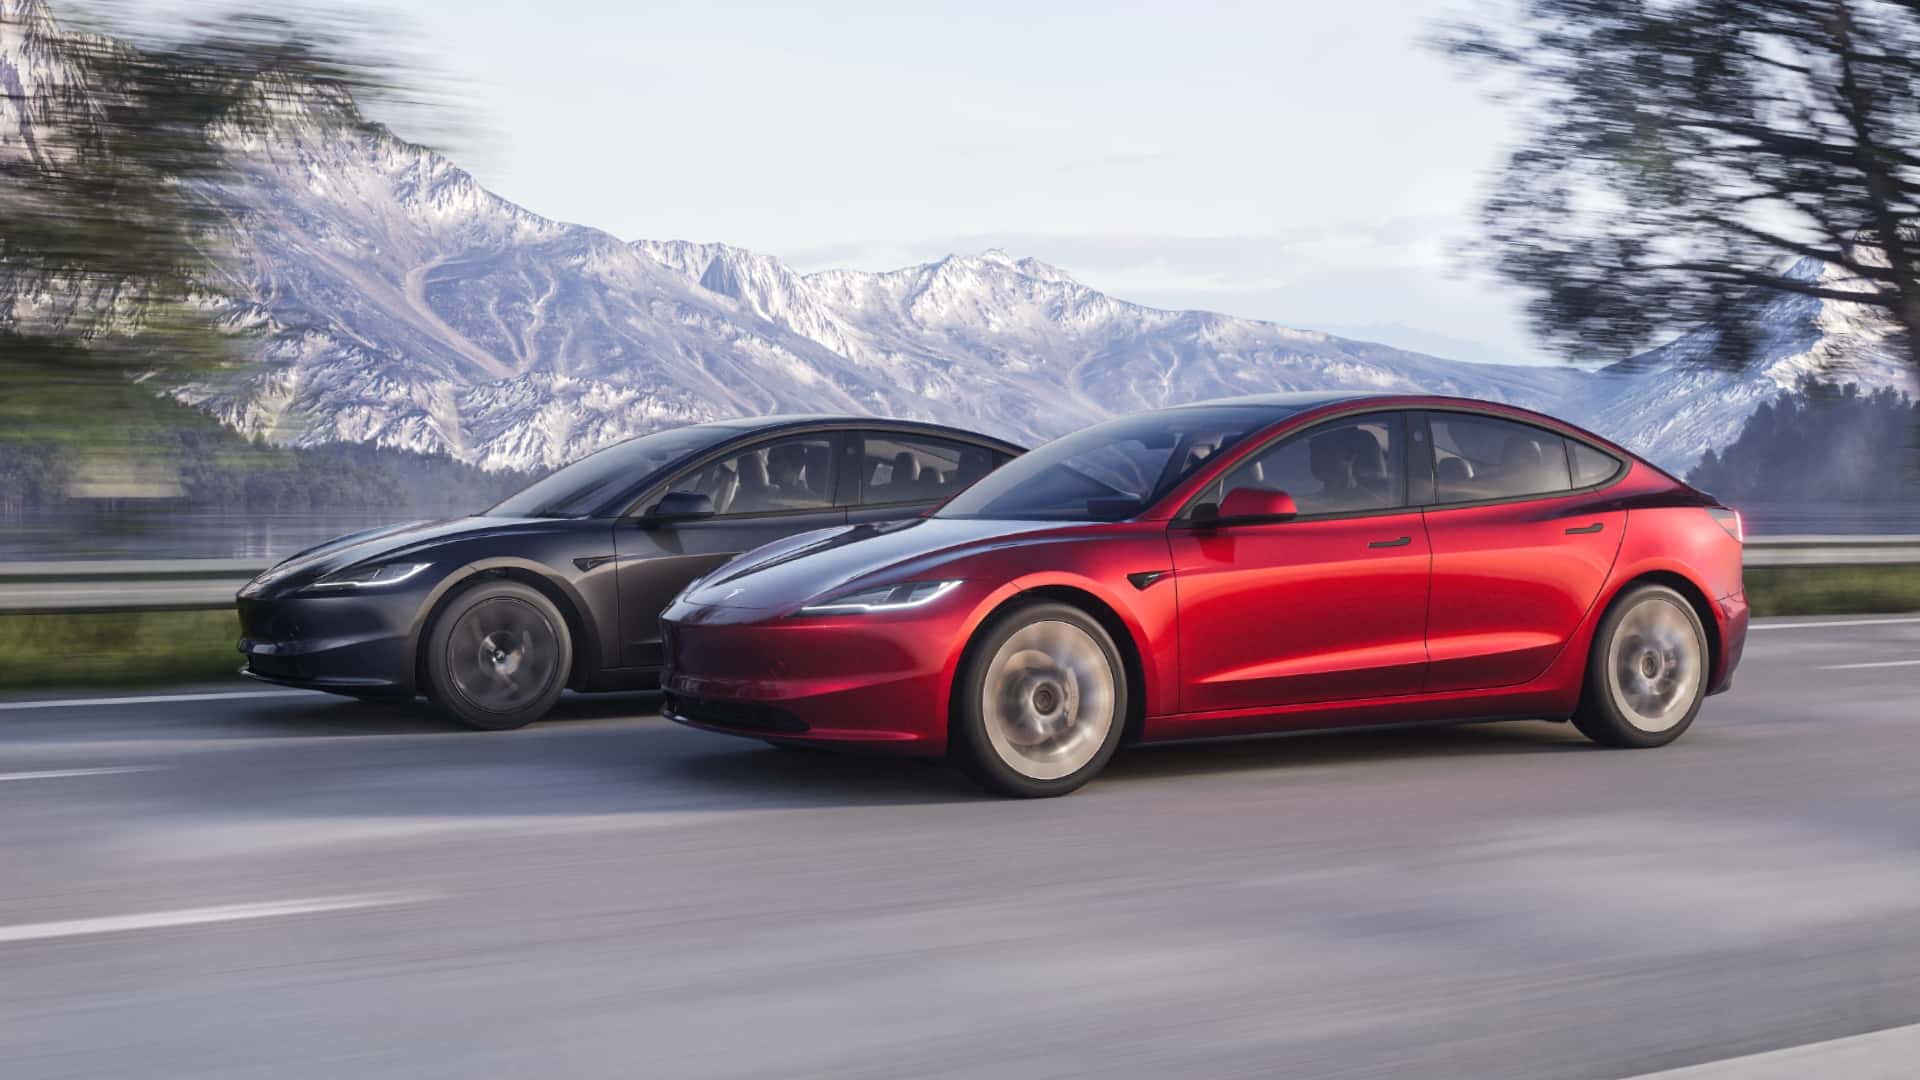 2023 Tesla Model 3 Facelift in Pics: See Design, Features